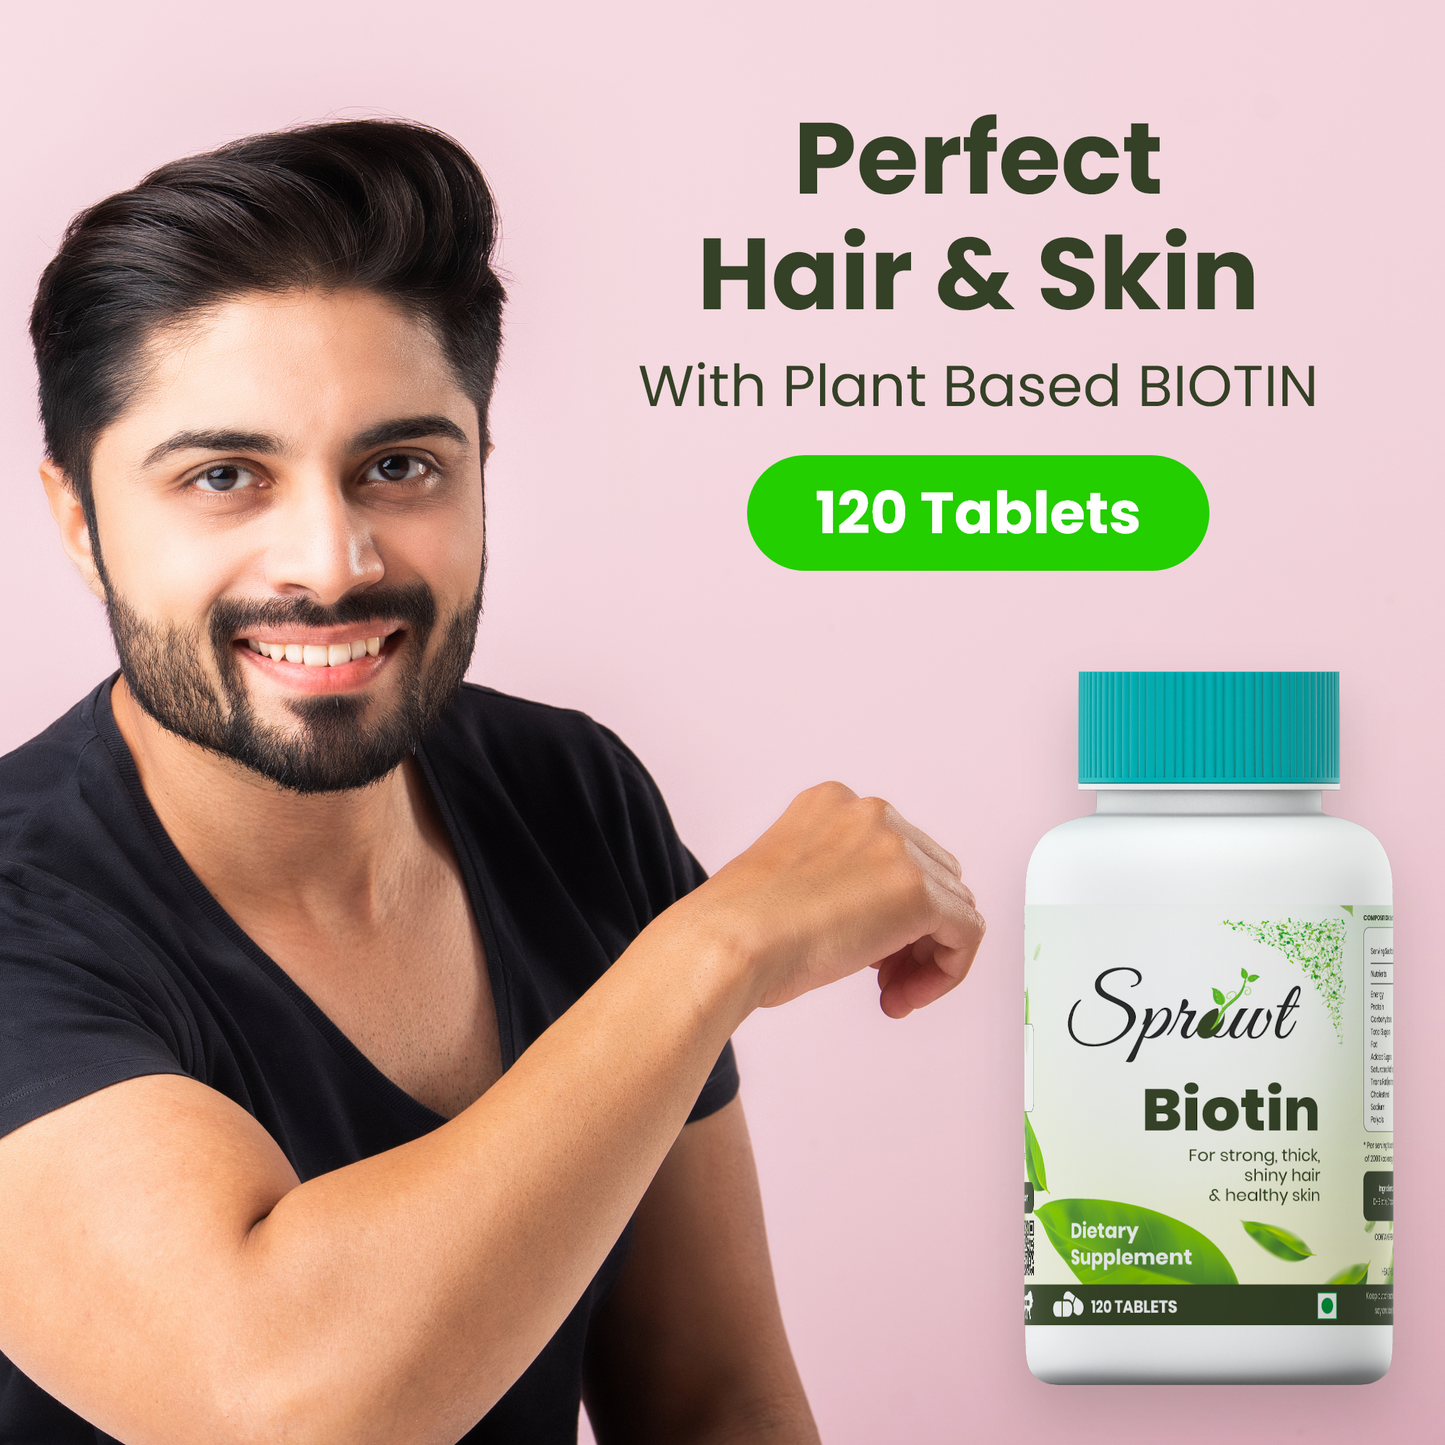 Sprowt Plant Based Biotin for Hair Growth, Skin & Nails - 10000 mcg | Pack of 3, 120 Tablets Each